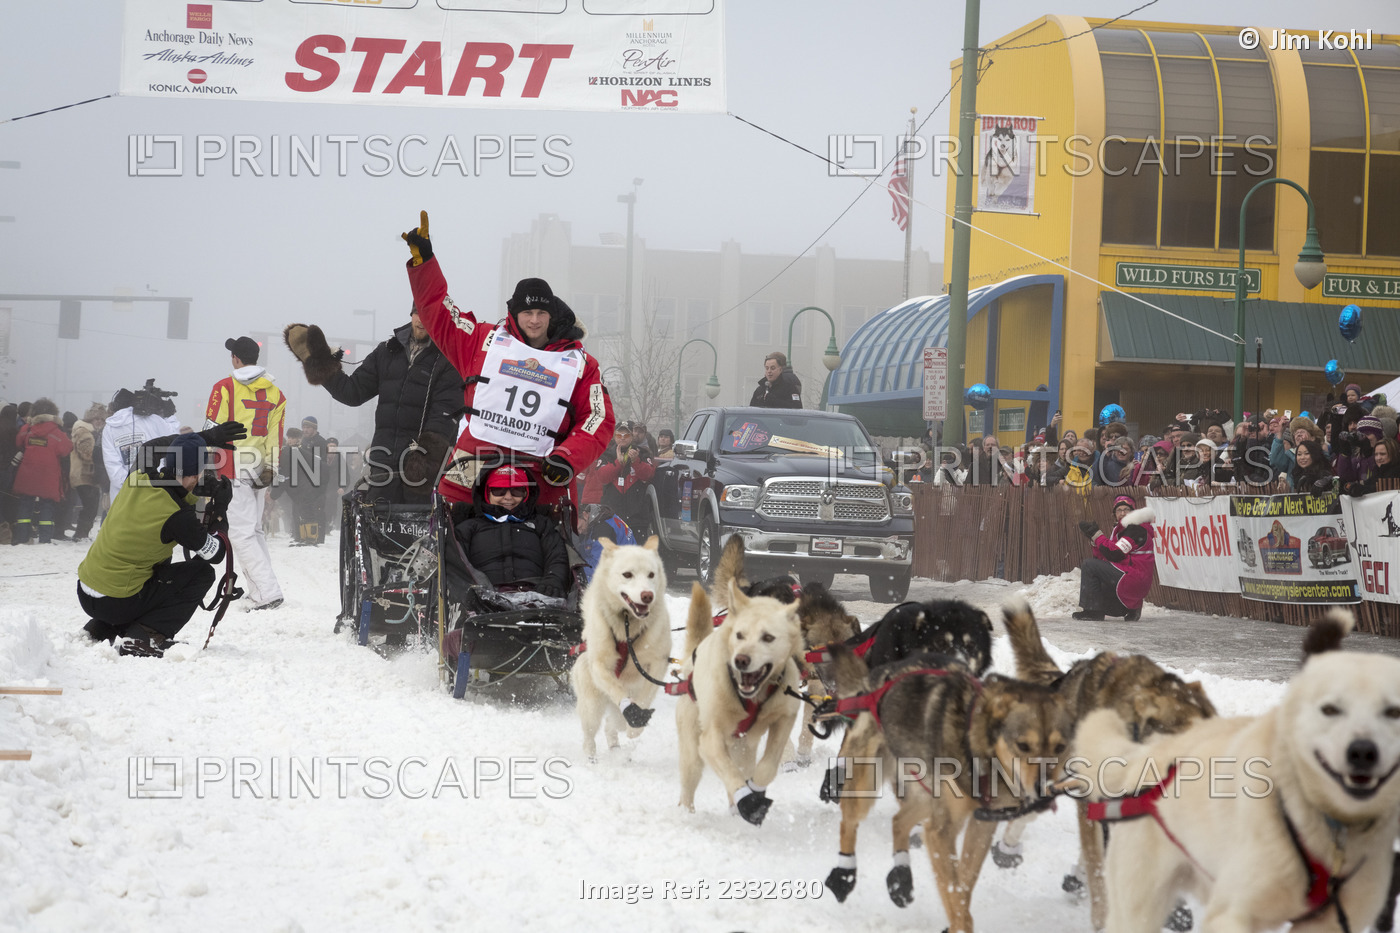 Dallas Seavey And Team Leave The Ceremonial Start Line At 4Th Avenue And D ...